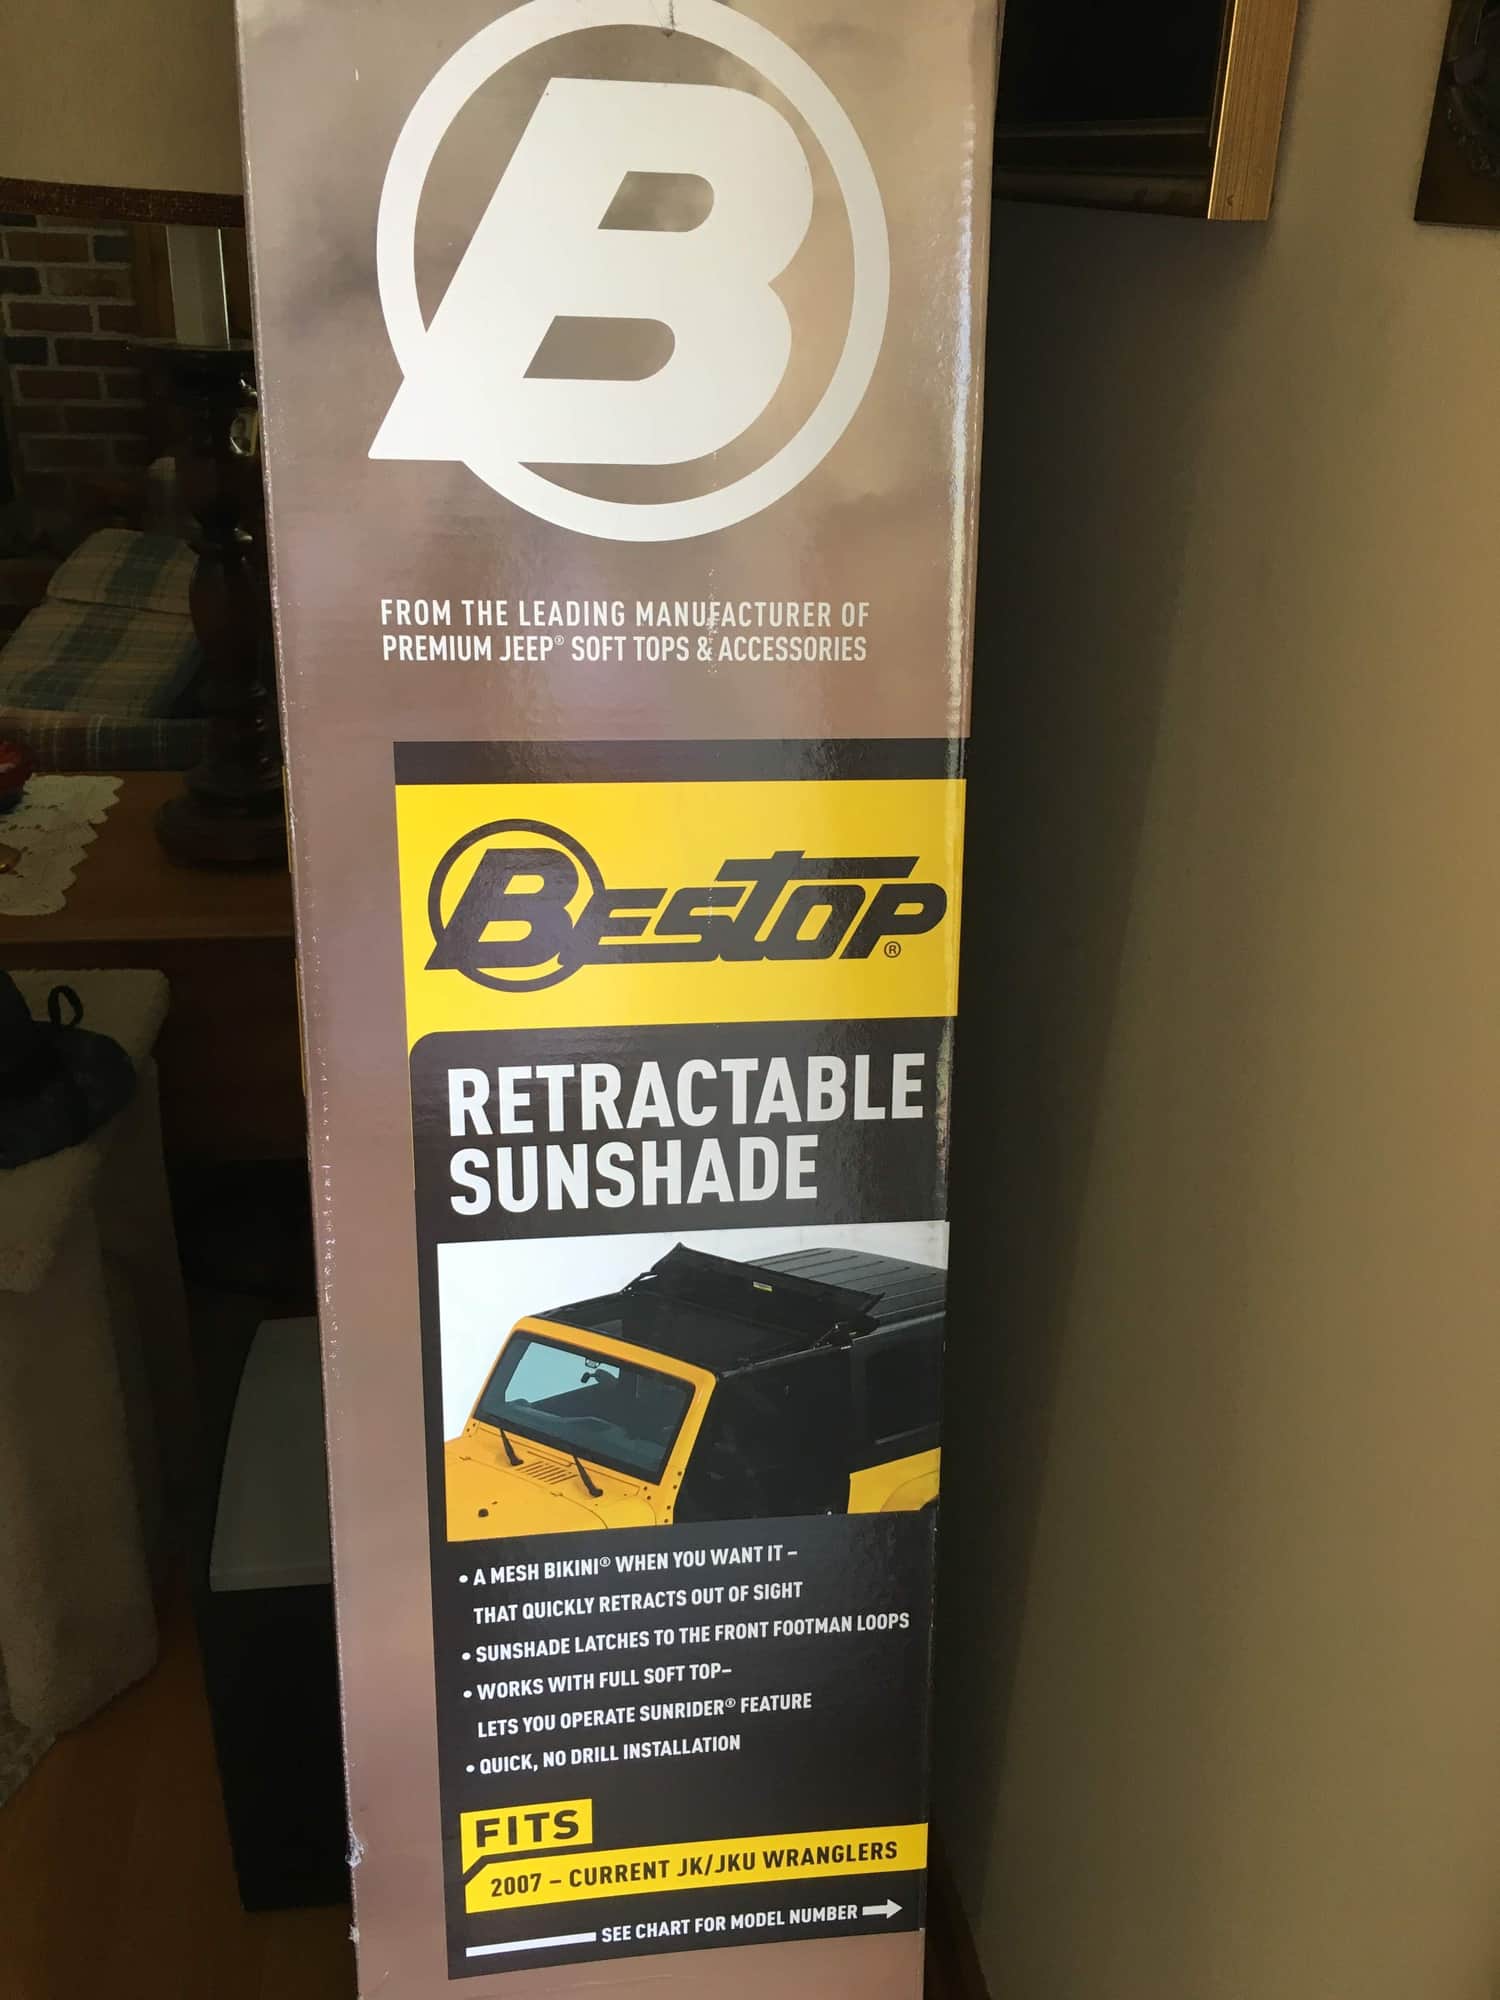 Accessories - Bestop Retractable Sunshade for Soft Tops - Black 52405-11 - New - 2007 to 2018 Jeep Wrangler - Richmond, VA 23111, United States